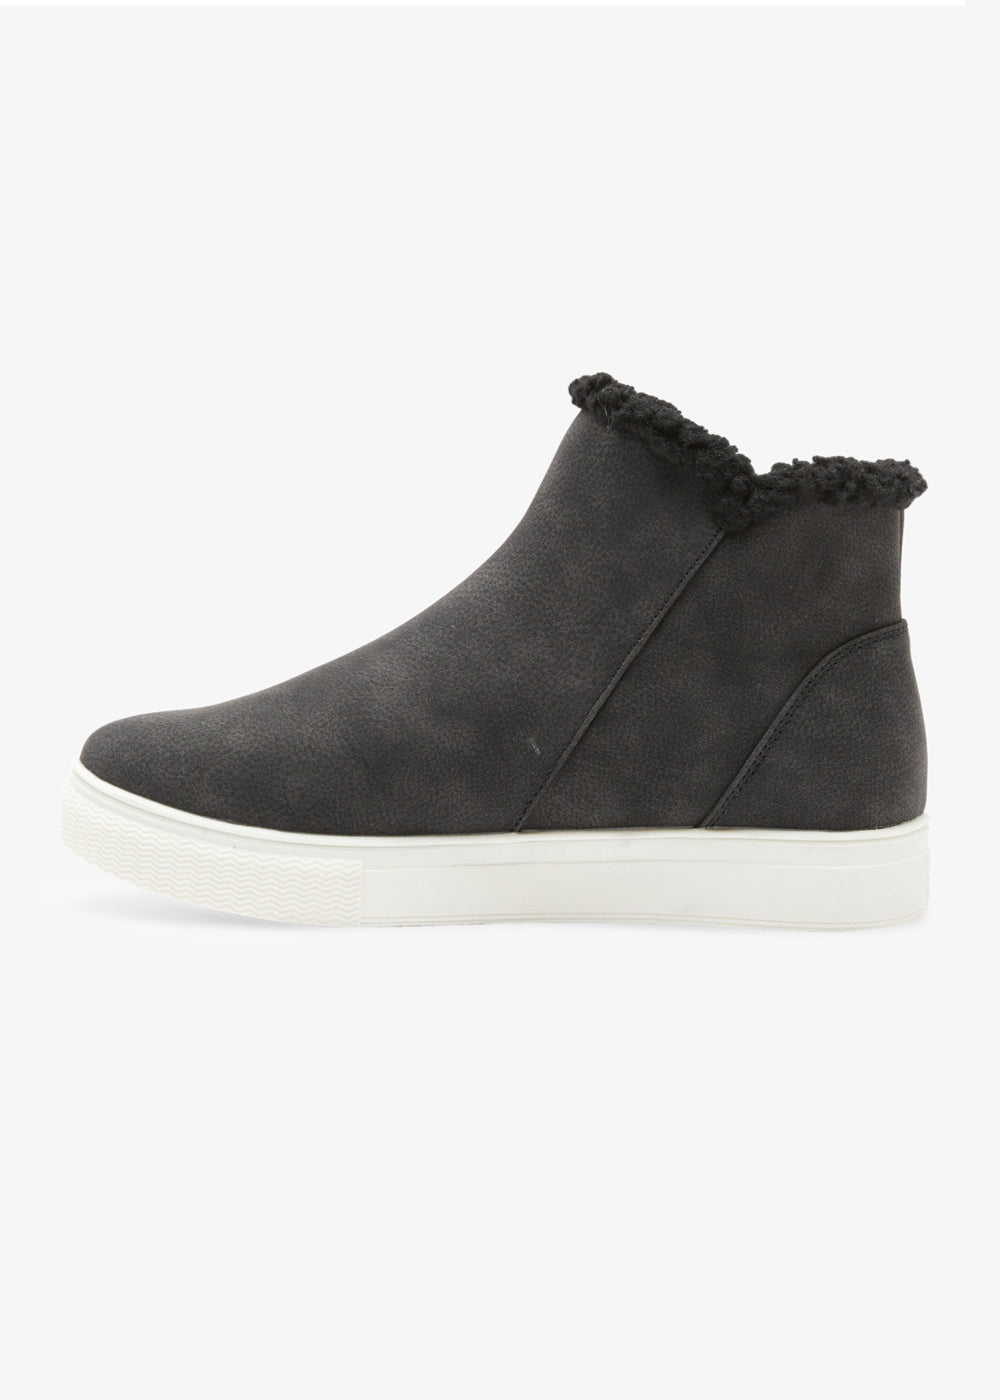 Theeo Boots in Black by Roxy